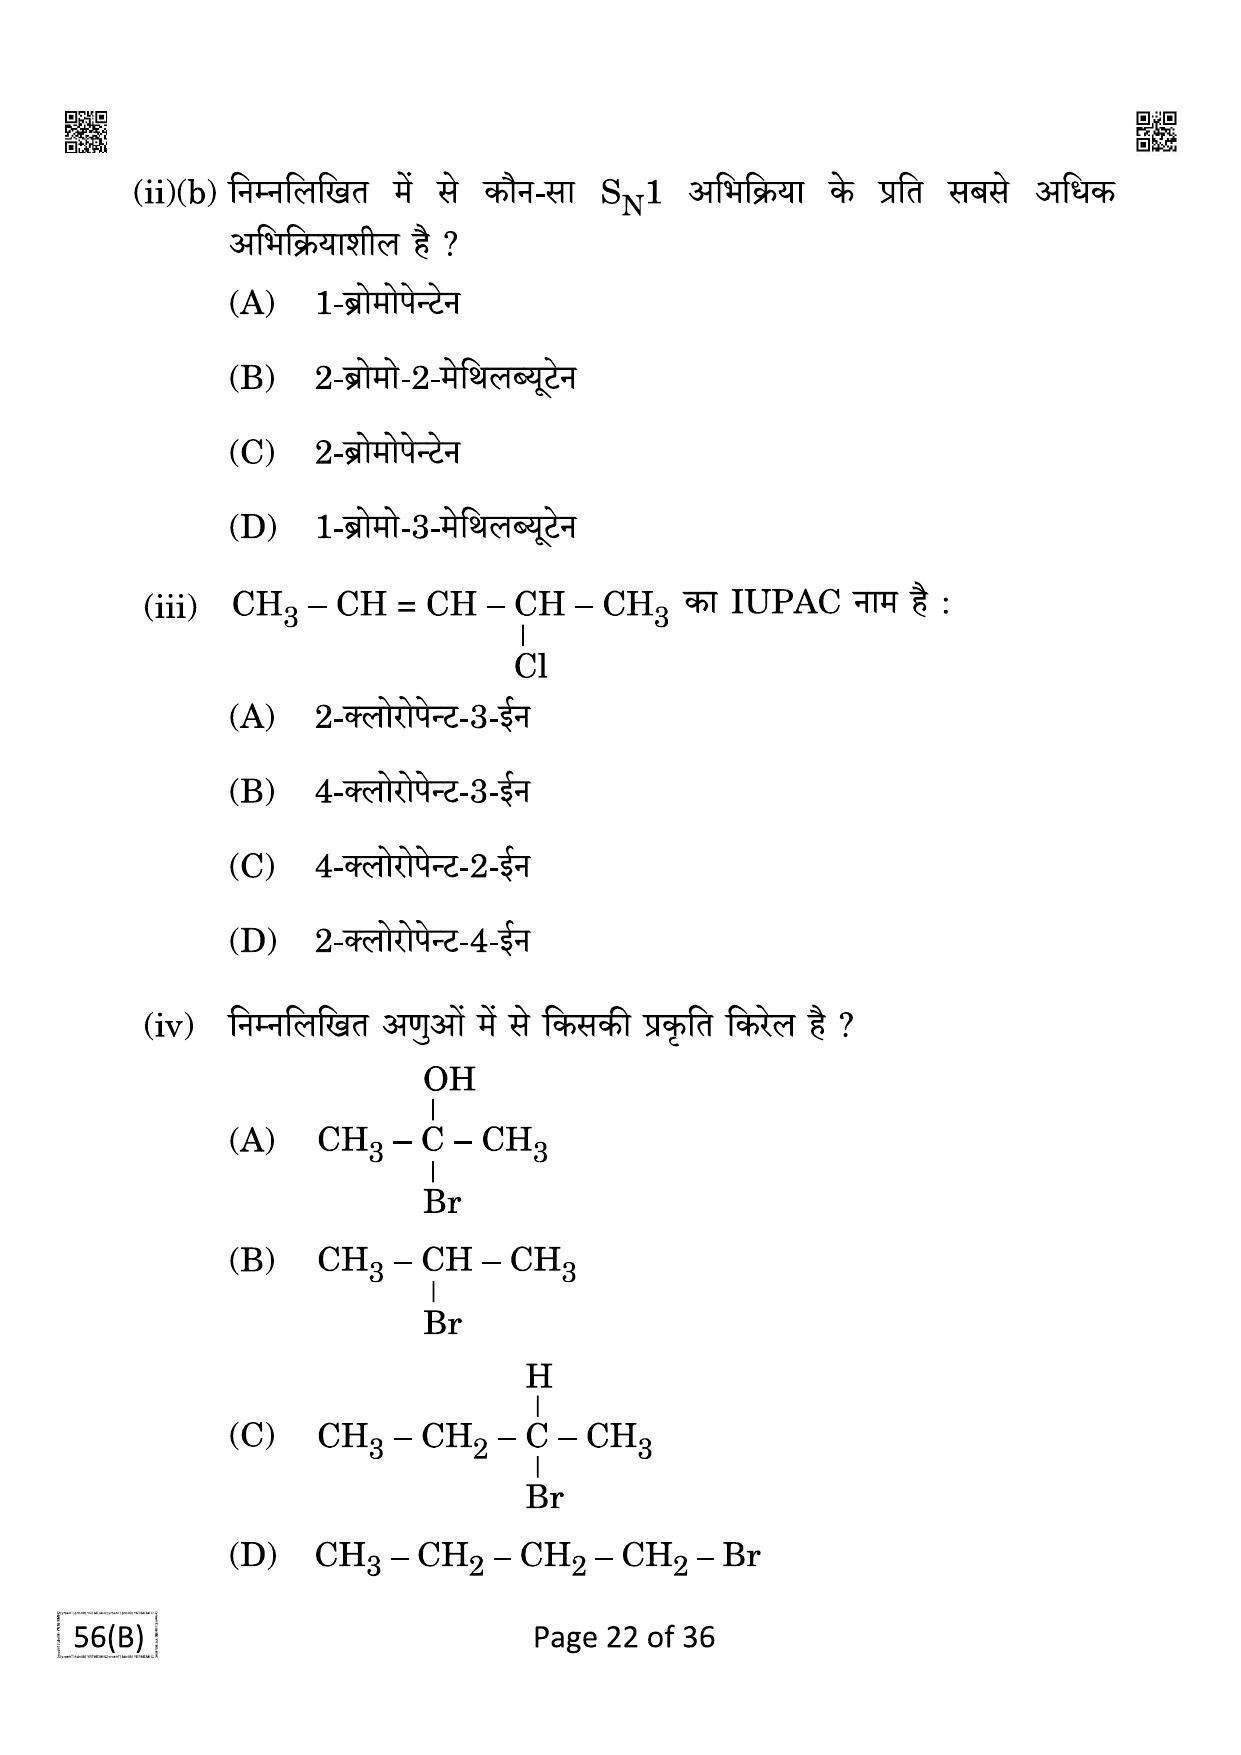 CBSE Class 12 QP_043_CHEMISTRY_FOR_BLIND_CANDIDATES 2021 Compartment Question Paper - Page 22